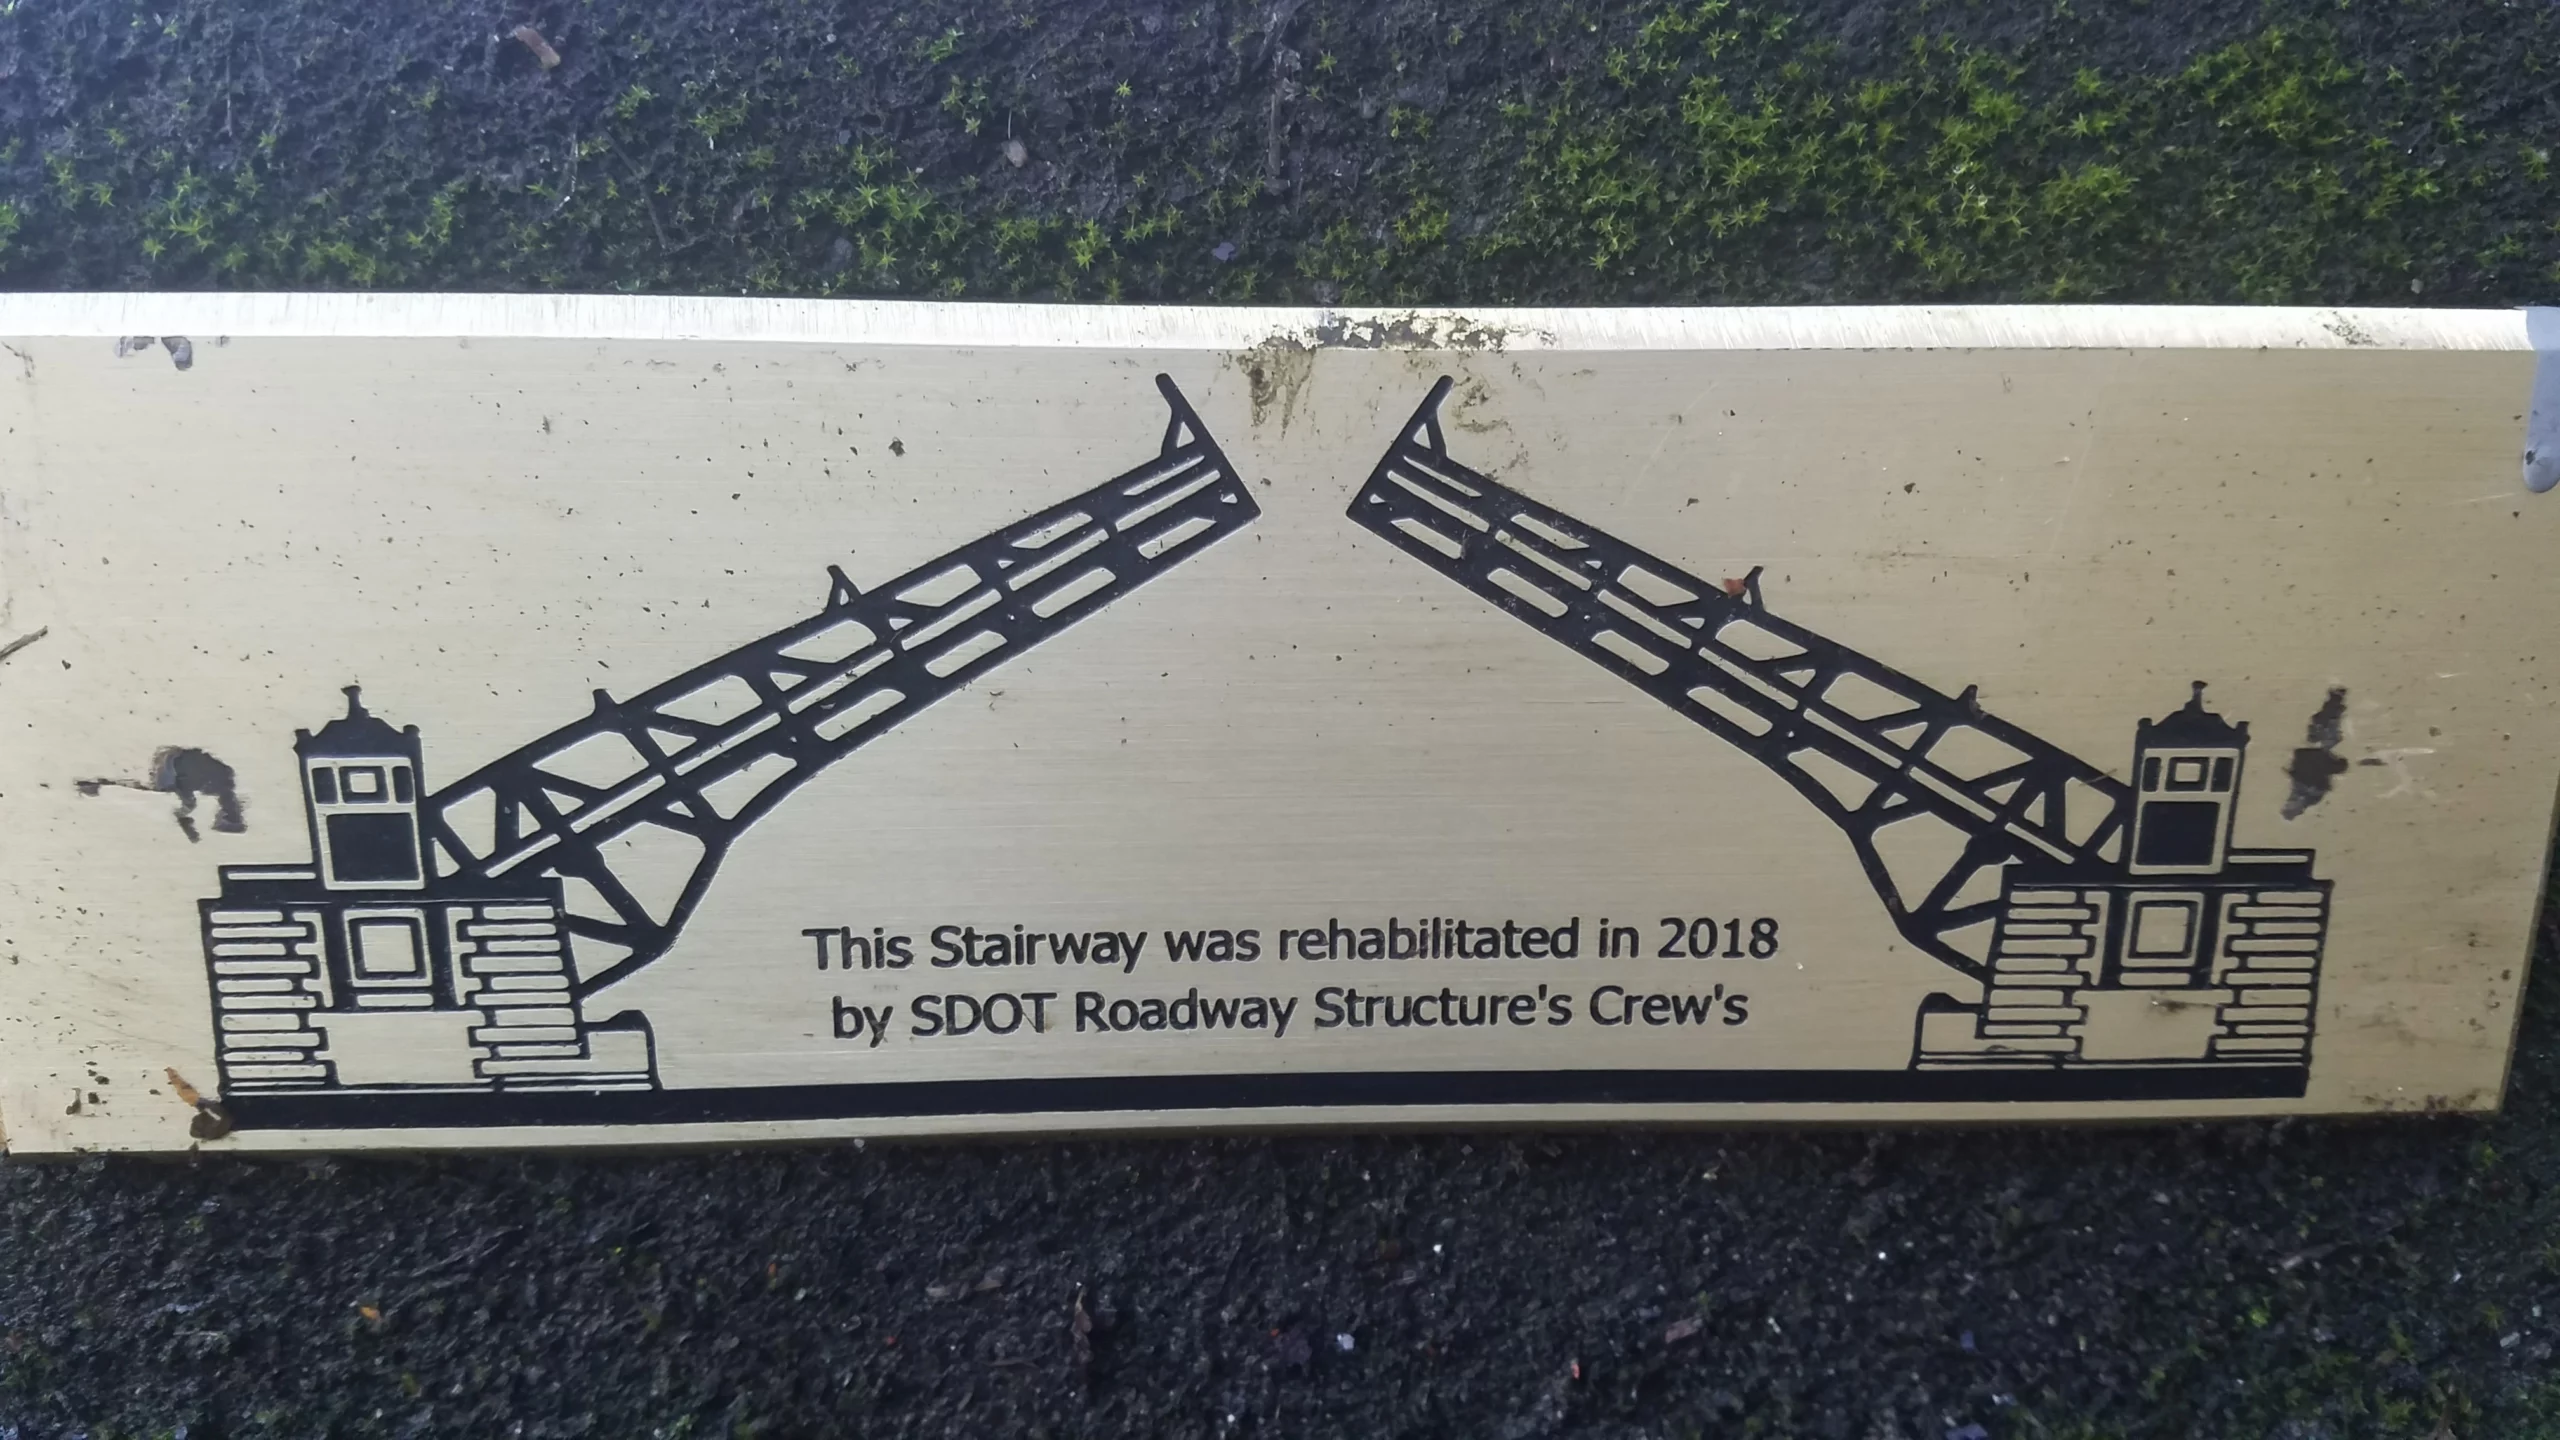 A picture of a draw bridge with the words: "The Stairway was rehabilitated in 2018 by SDOT Roadway Structure's Crew's